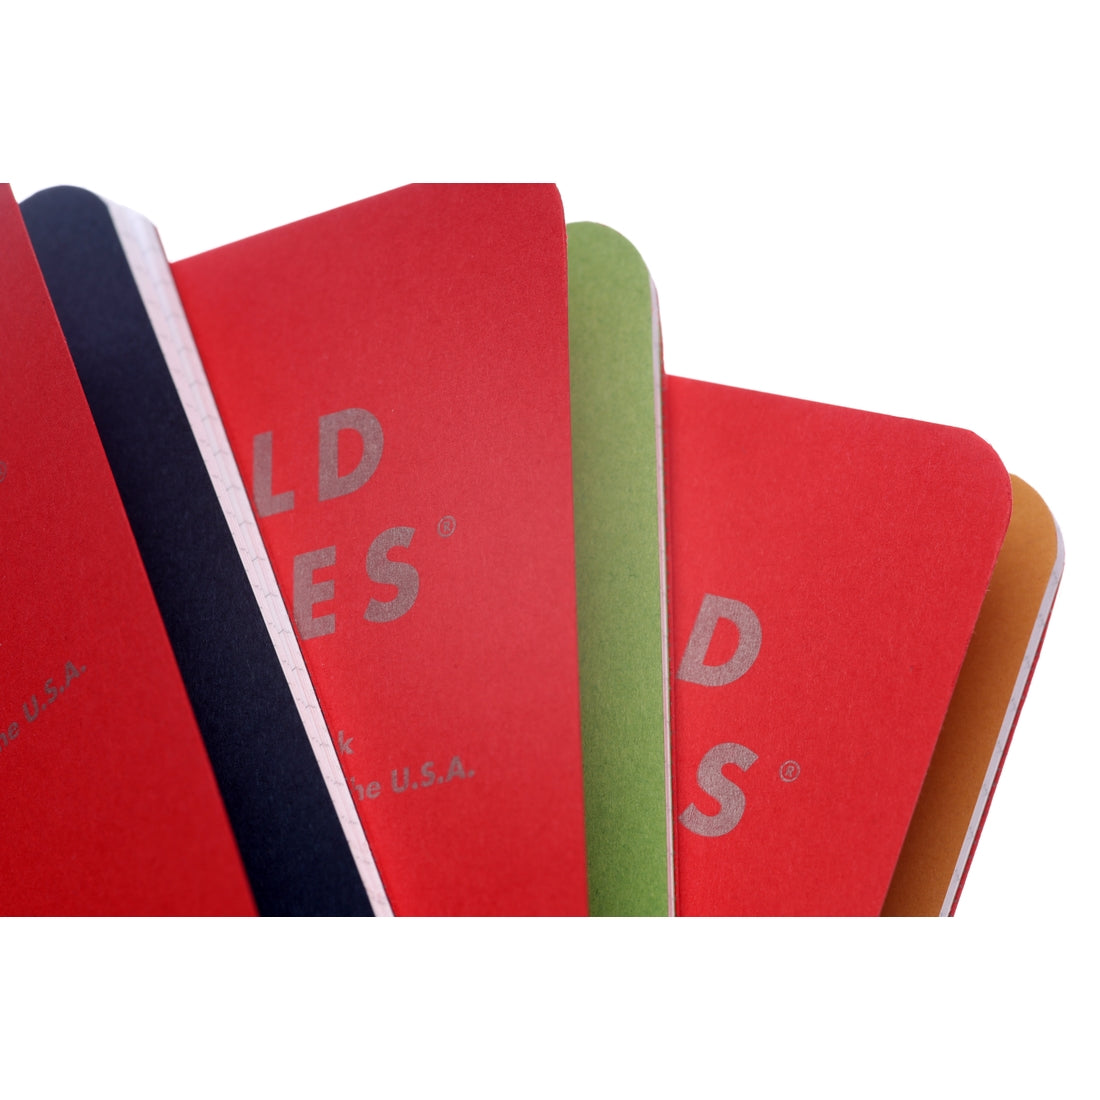 Detail view of "Red Hot" Field Notes 3-Pack.